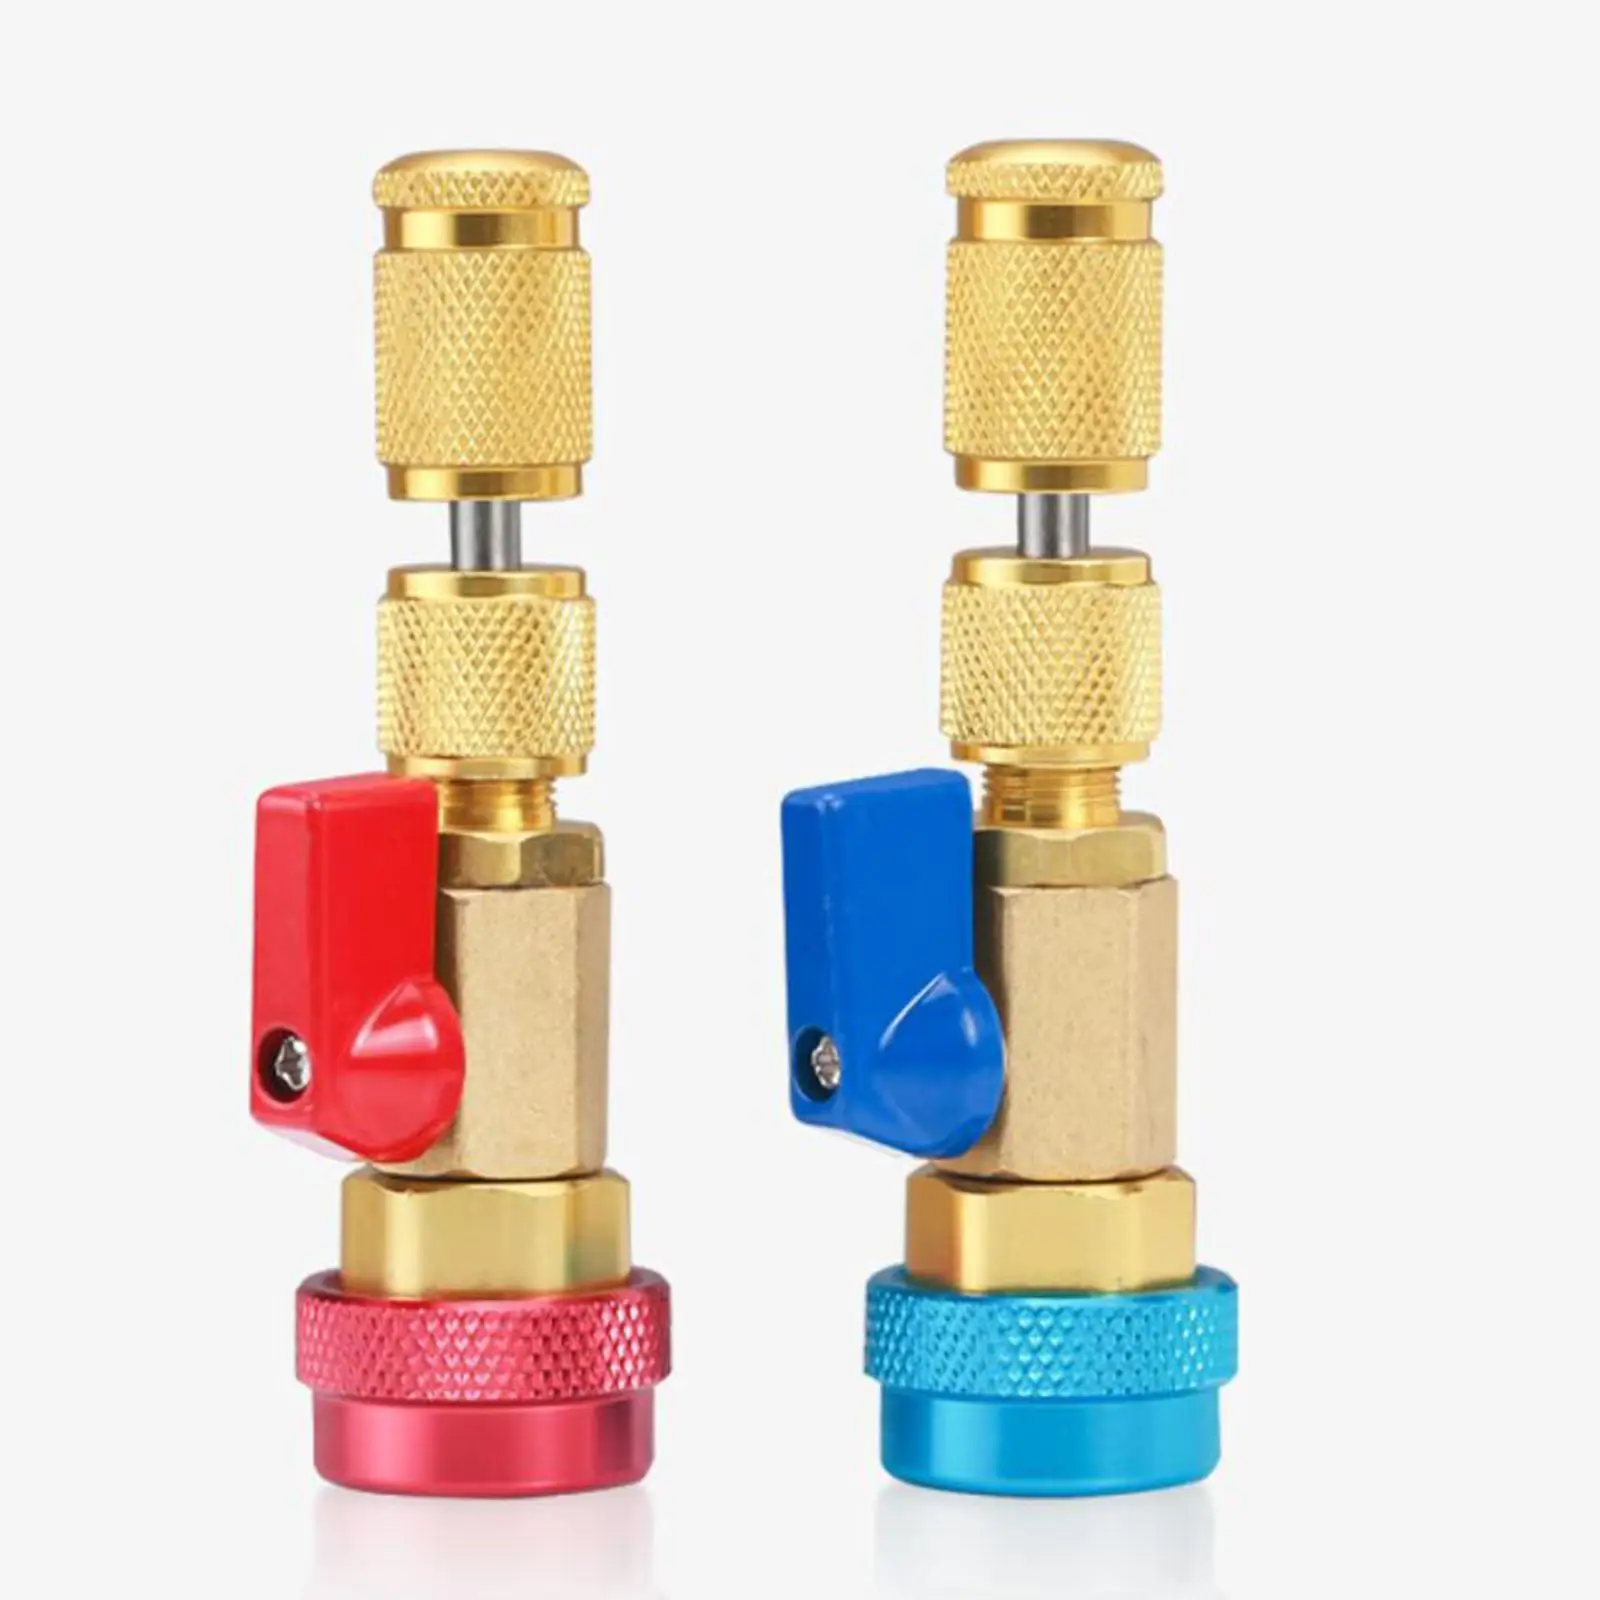 Automotive AC R134A R1234Yf Valve Core Remover and Installer Leakproof Tool Set Side Valve Tool Valve Core Couplers